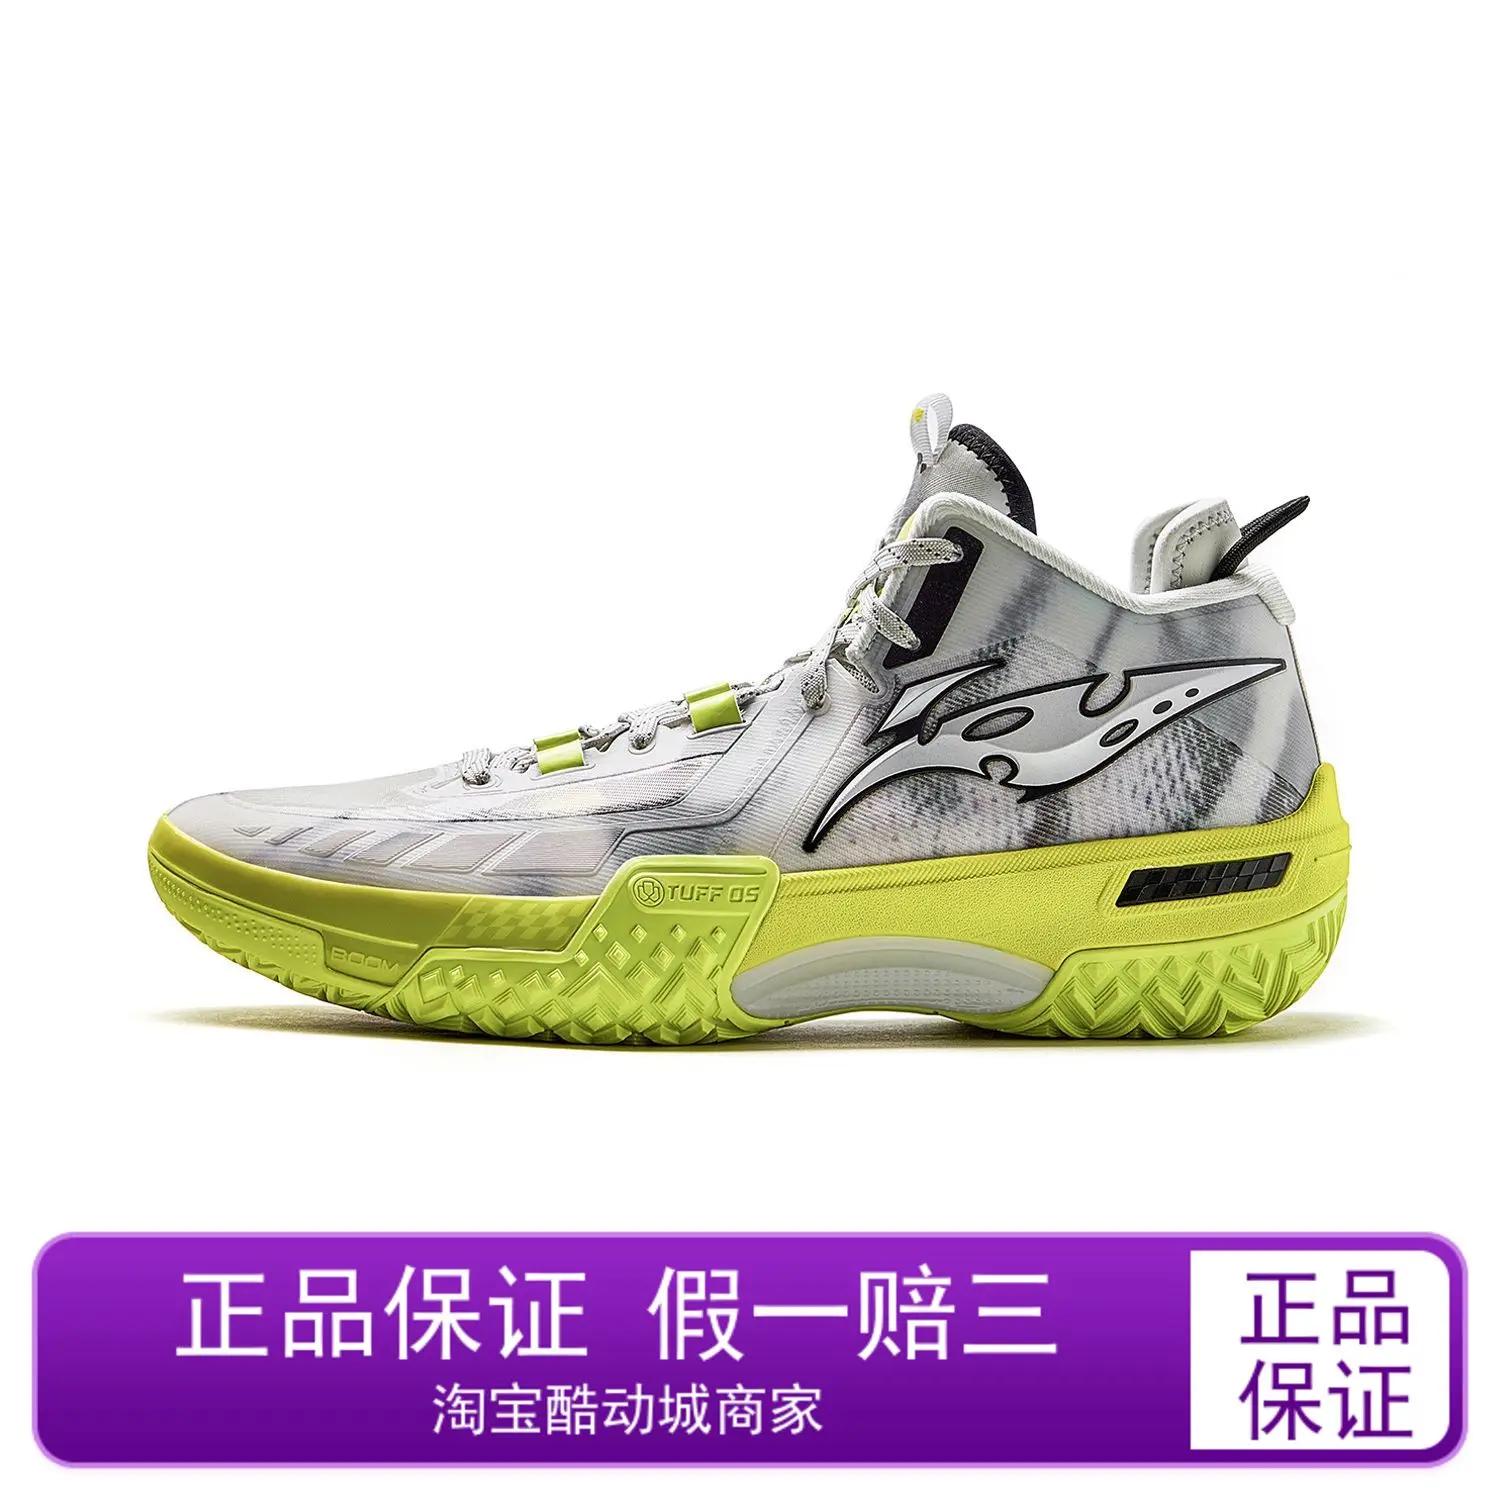 Li Ning GEMOUR | Outdoor Combat Basketball Shoes Technology 23 New Mens Shock Relief Non-Slip High Wear-Resistant Sn